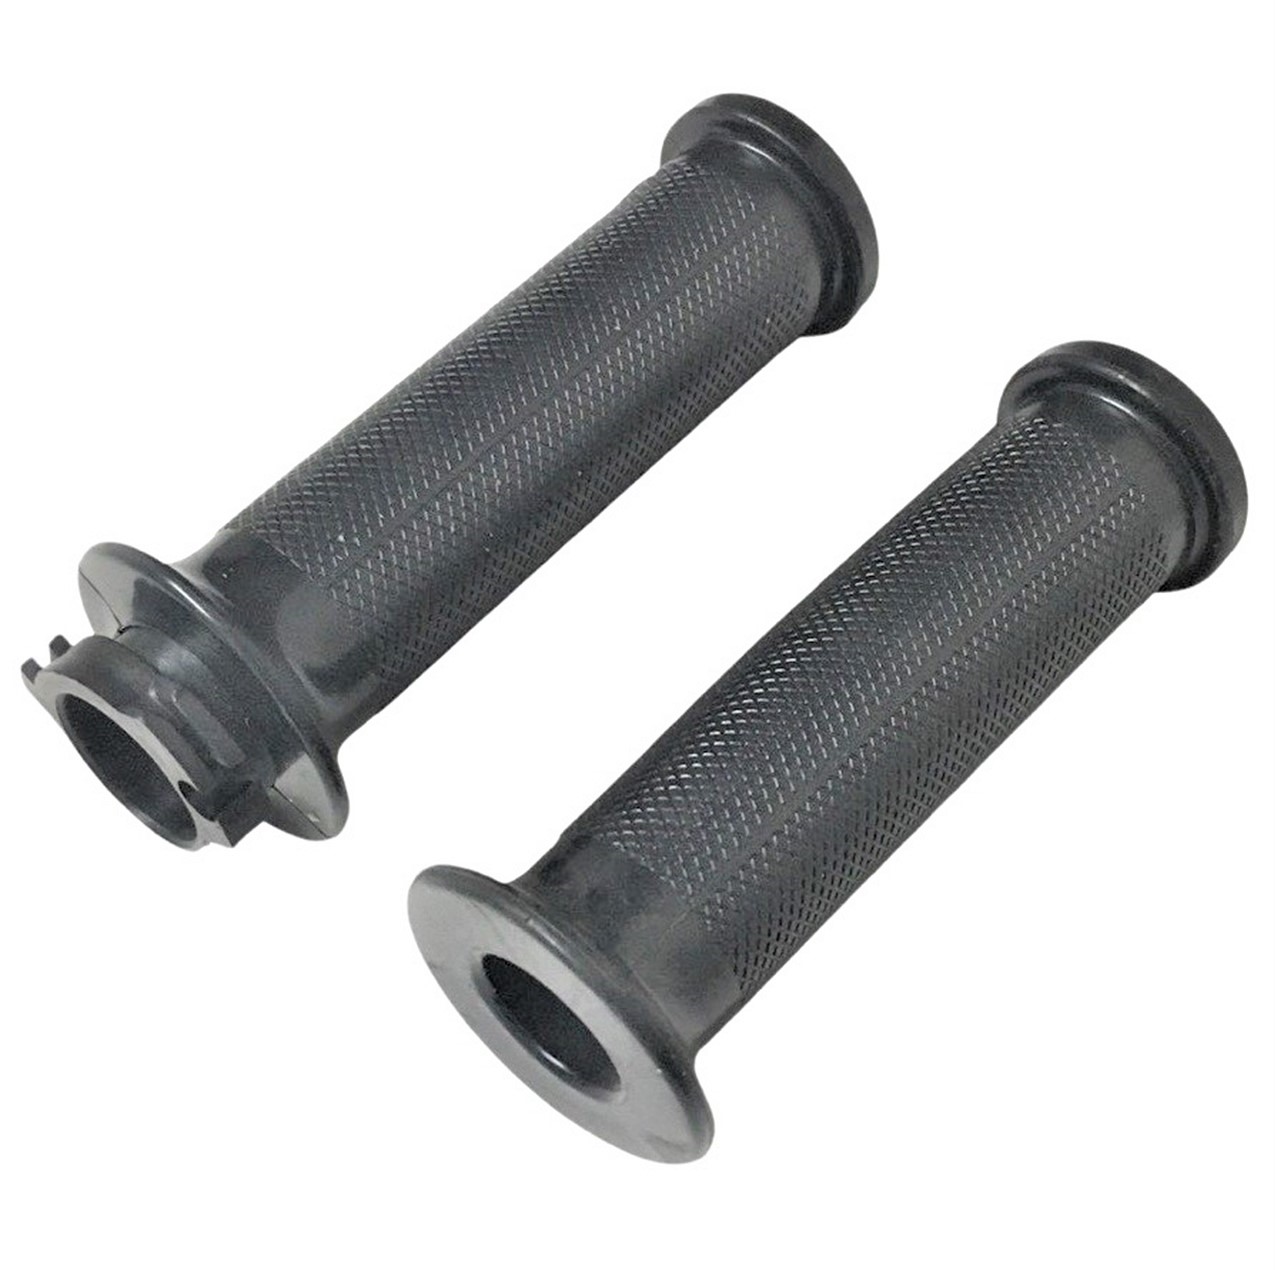 Scooter Grip Set with Throttle Tube 7/8" Fits Most 50-250cc Scooters